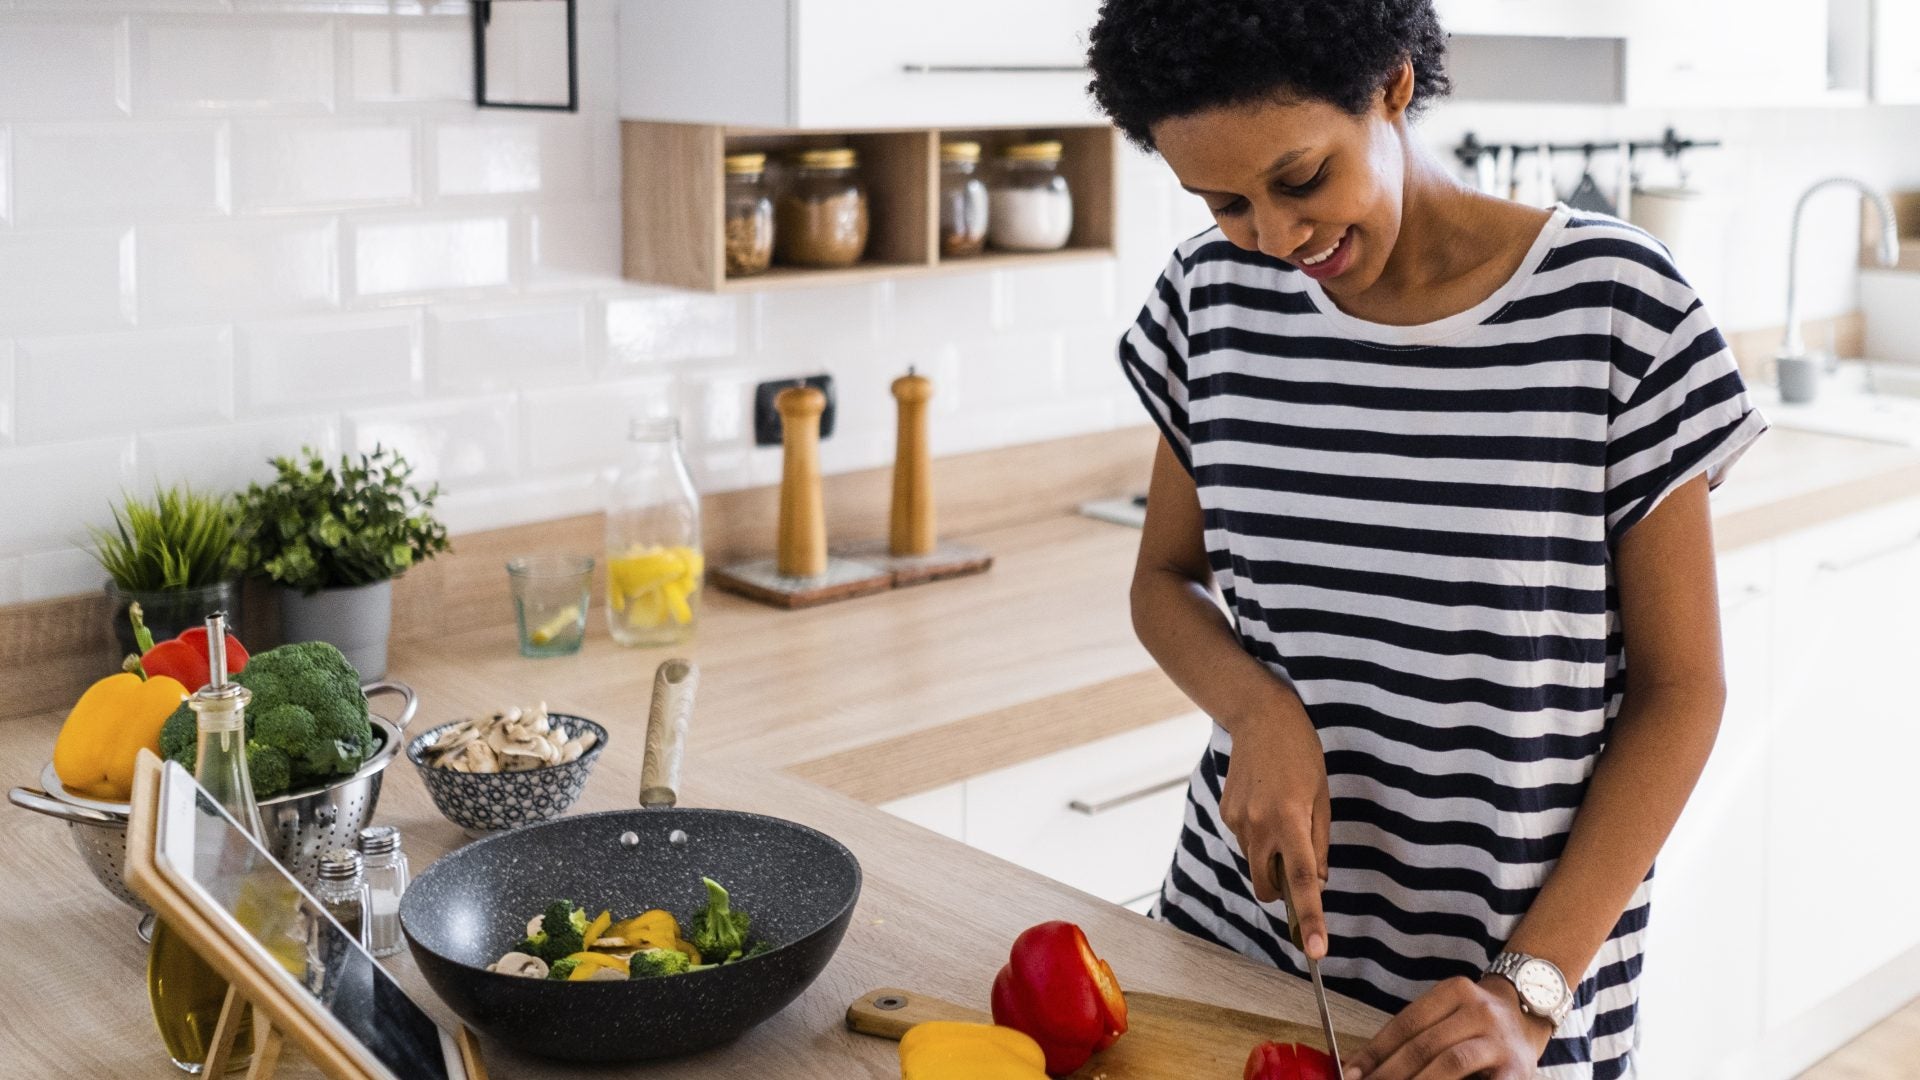 6 Black Women Foodie Influencers To Follow On Social Media